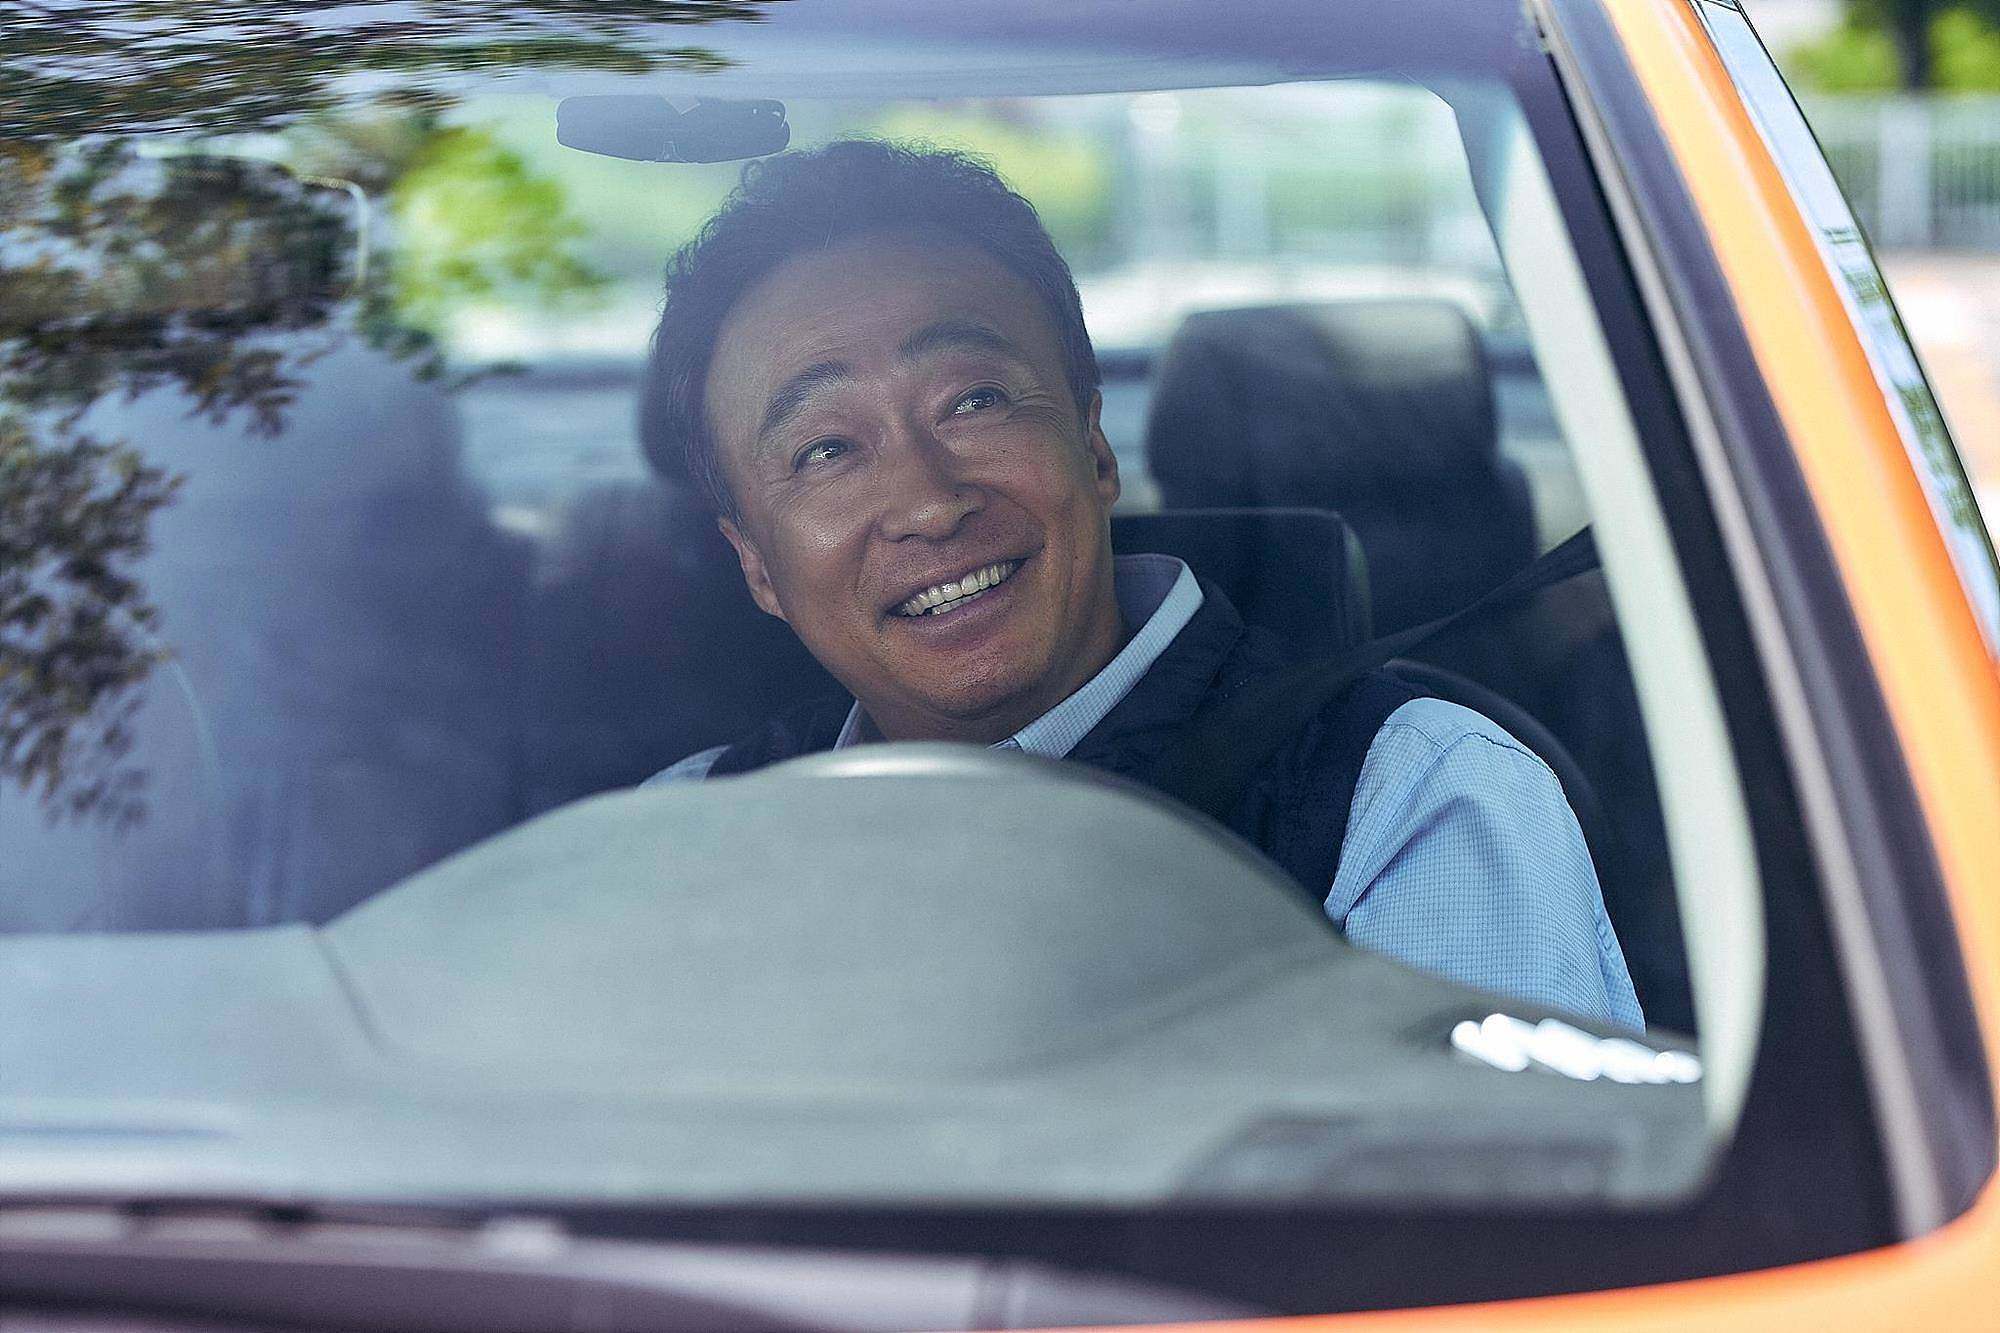 Lee Sung-min as taxi driver Oh Taek in a still from new Korean drama “A Bloody Lucky Day”, which premiered at Busan 2023. Yoo Yeon-seok and Lee Jung-eun co-star.